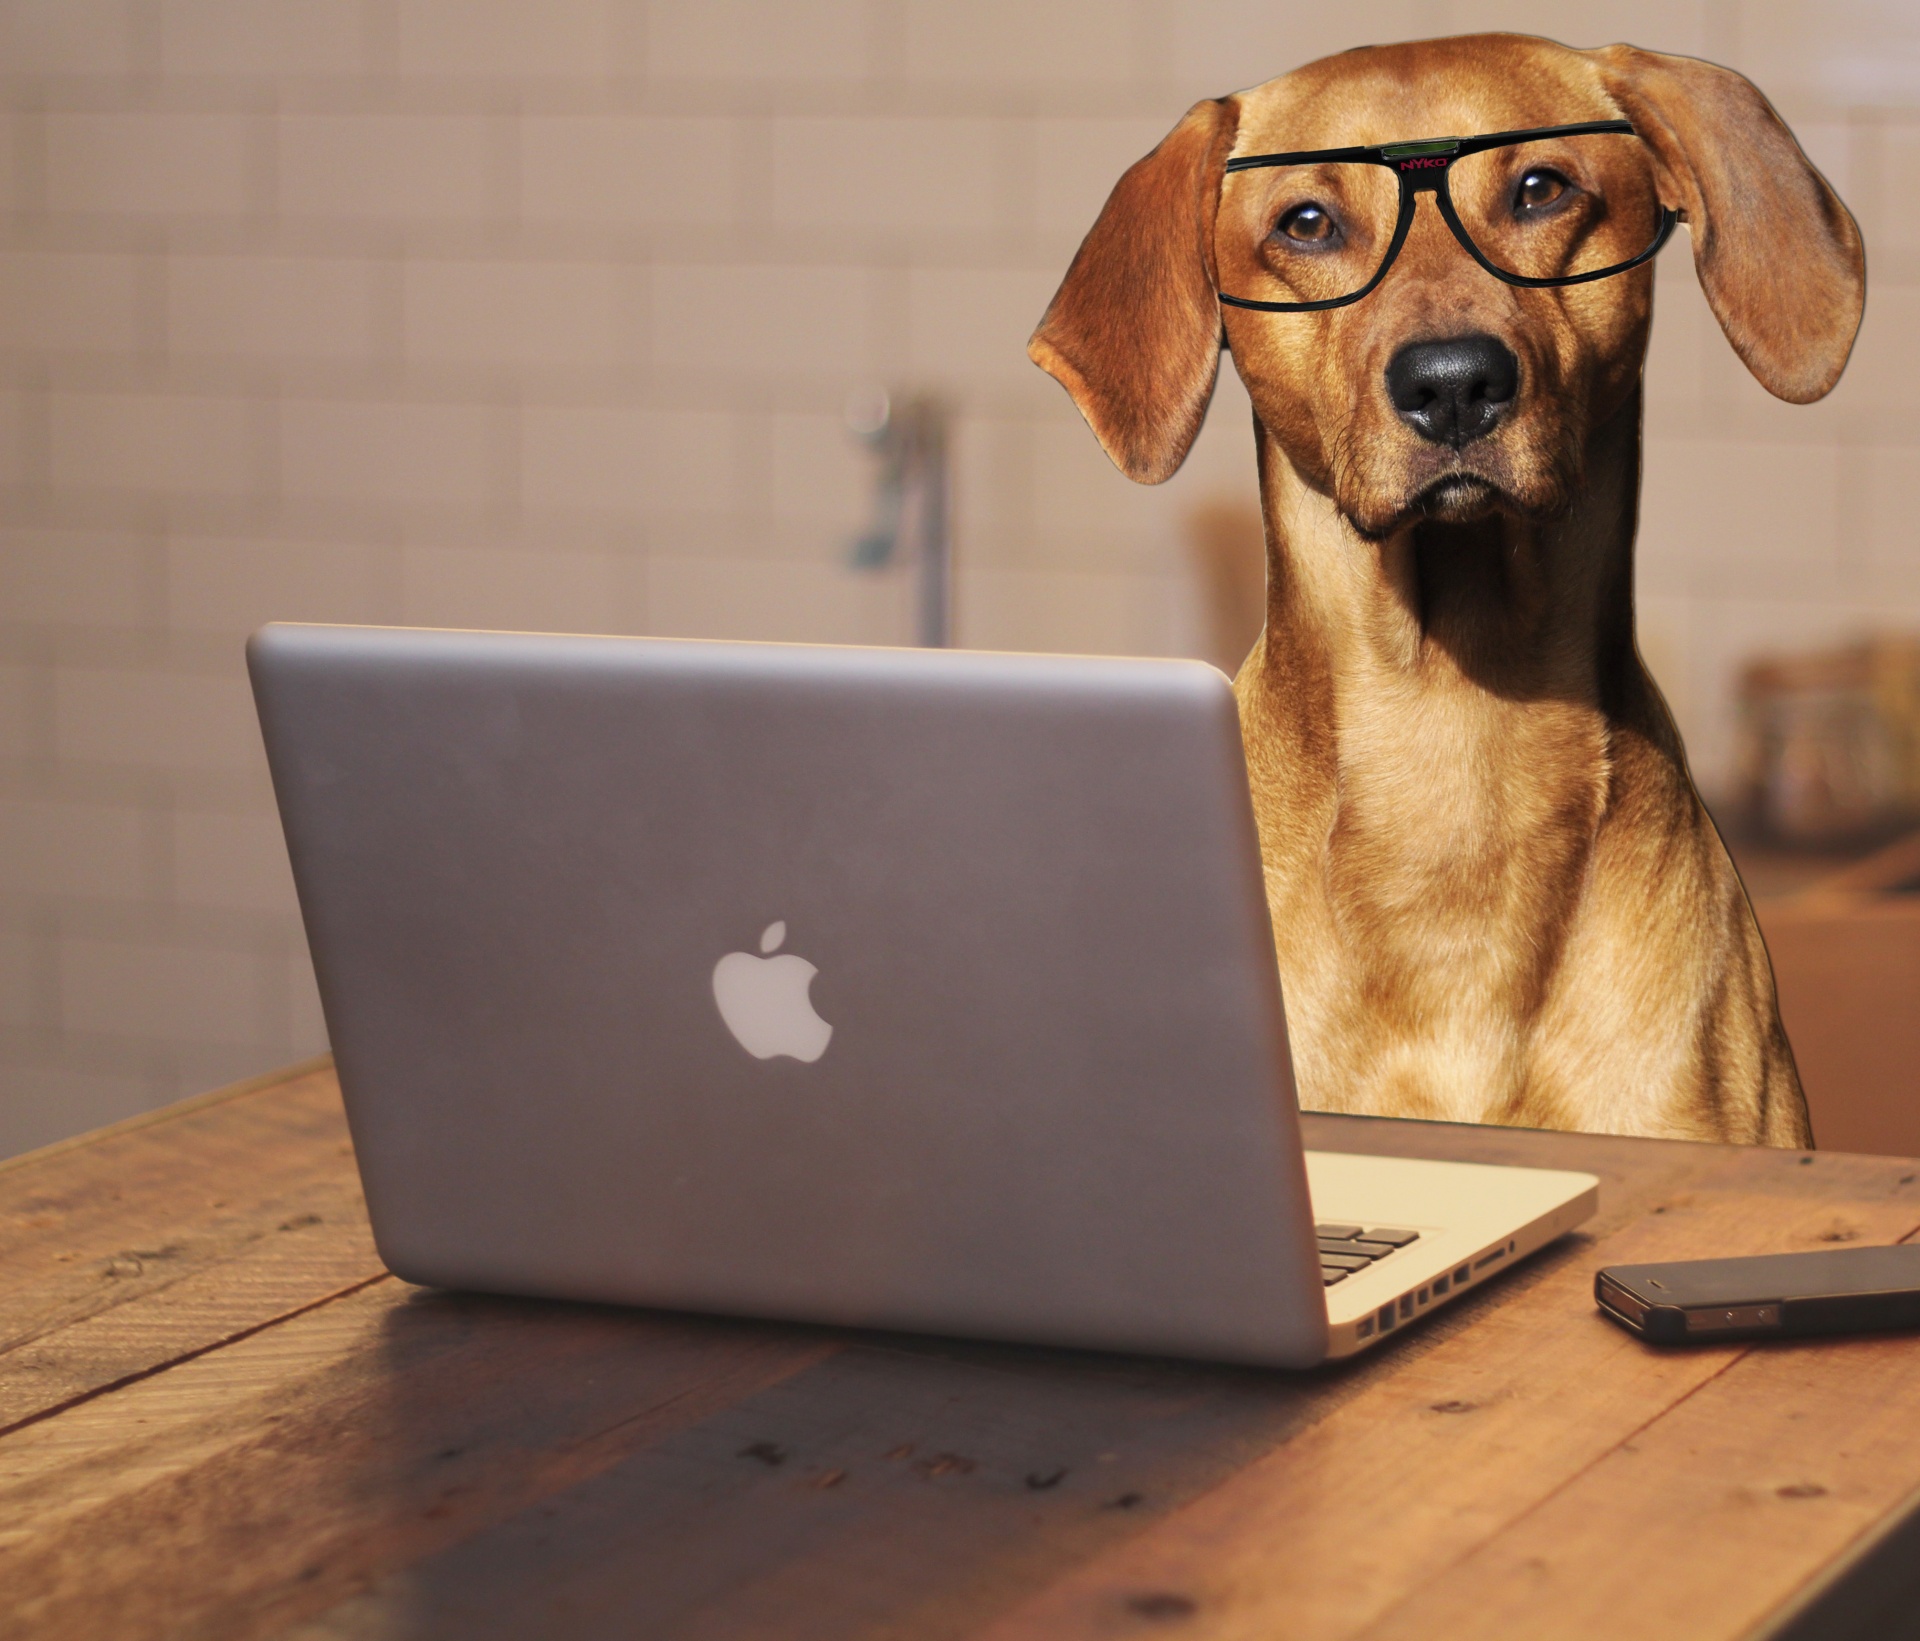 Dog wearing glasses and working on a laptop